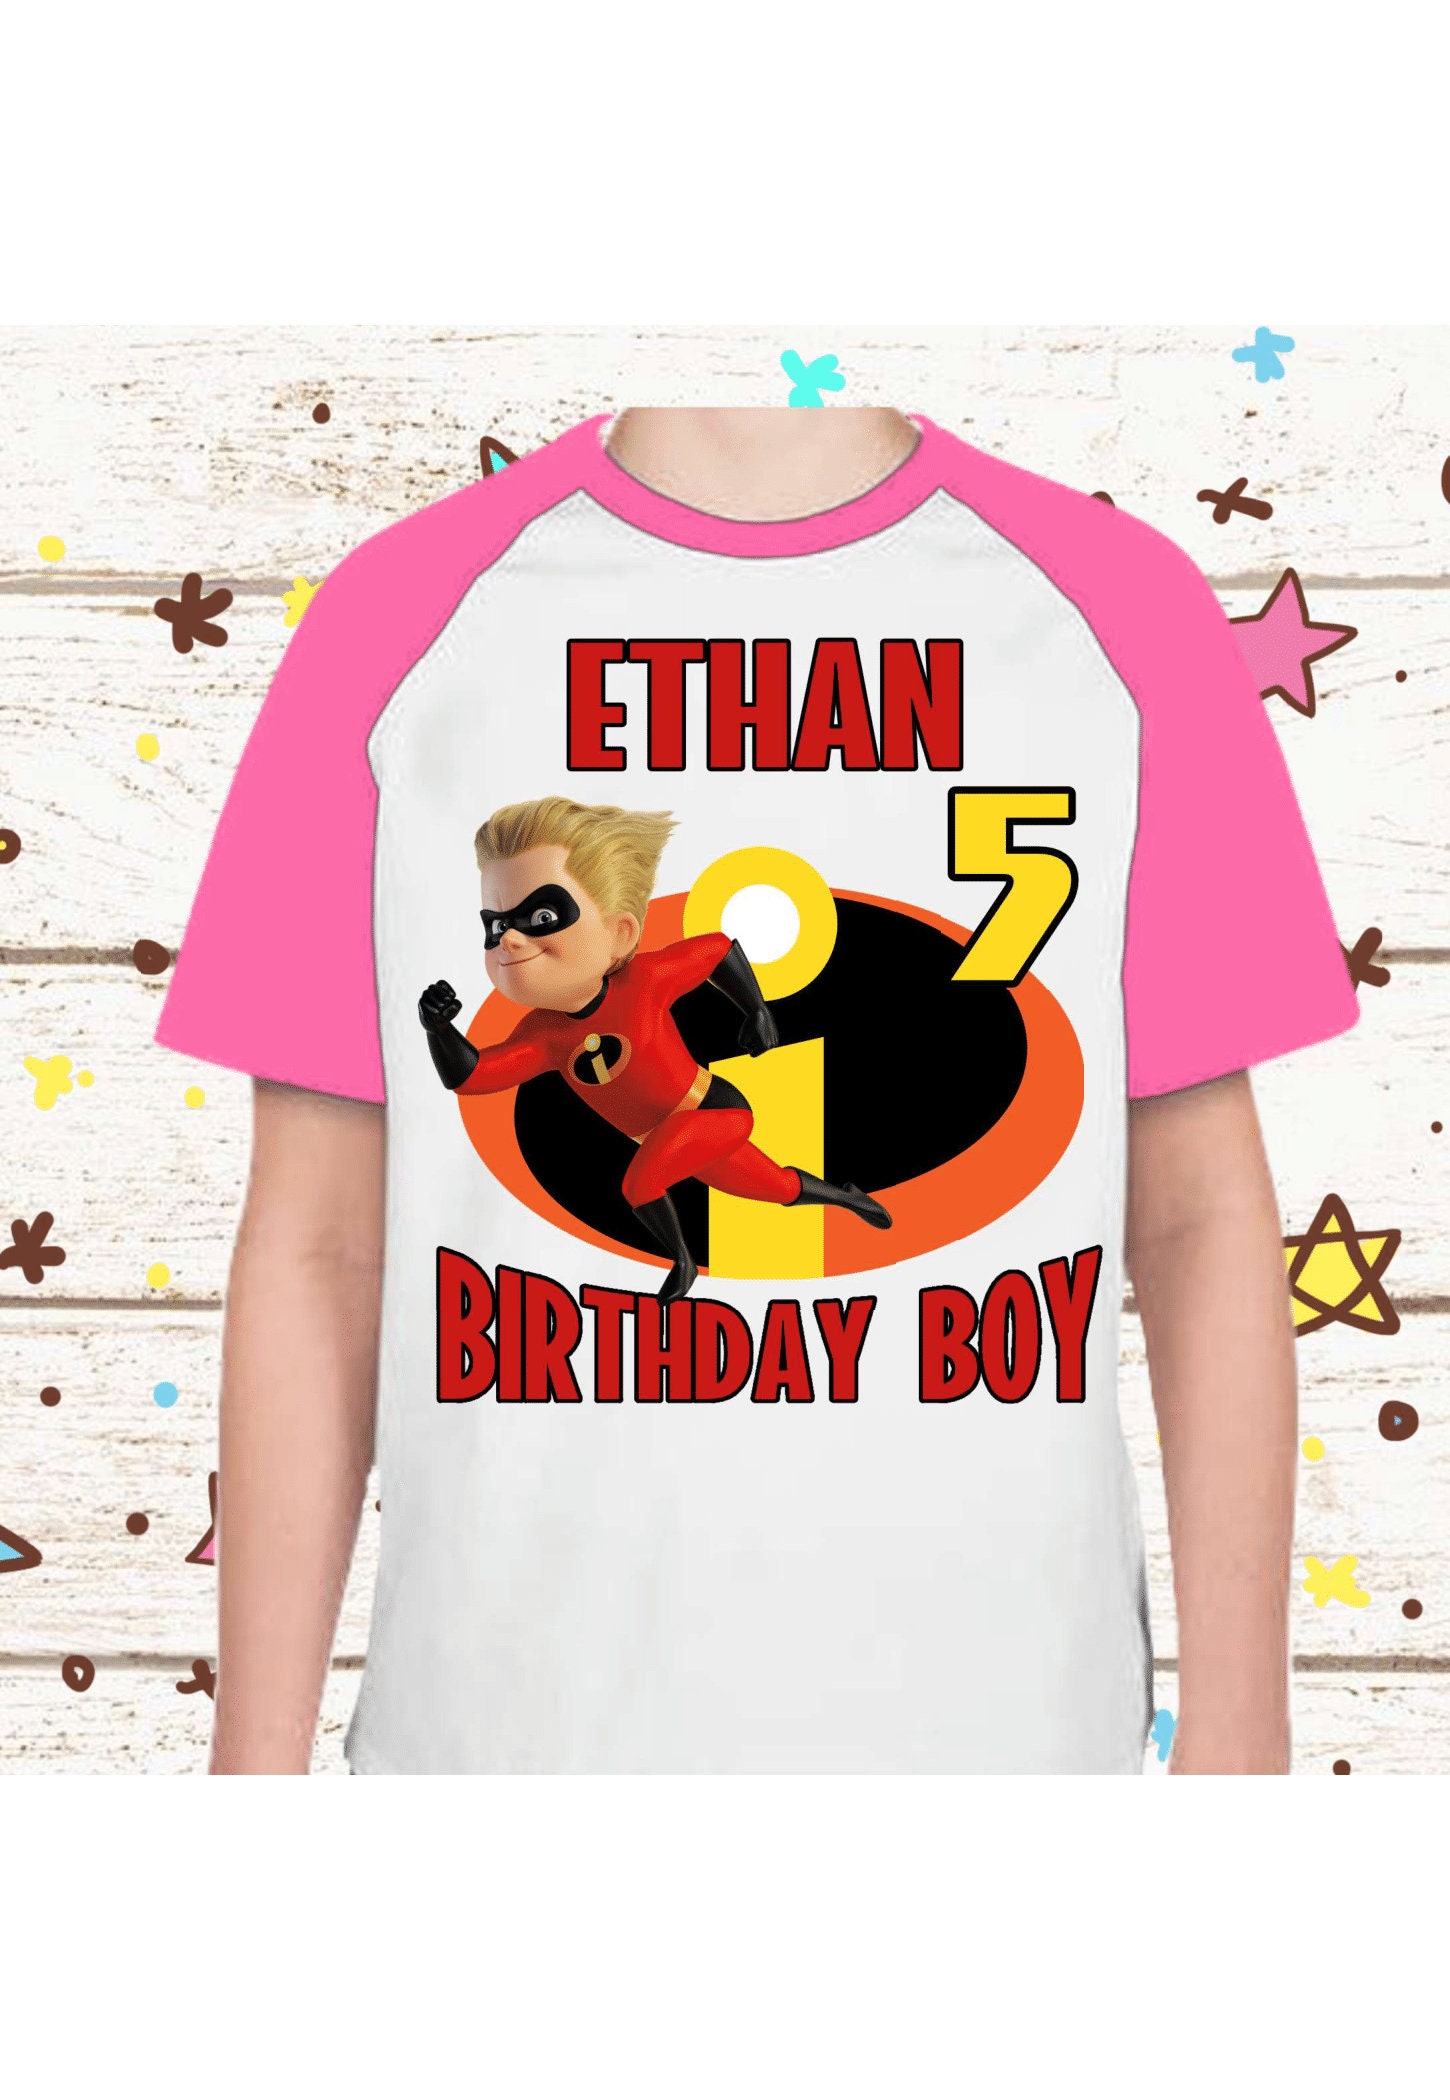 Discover Incredibles Birthday Shirt Personalized Name and Age Family Incredibles Party theme shirt All sizes family shirt gift birthday